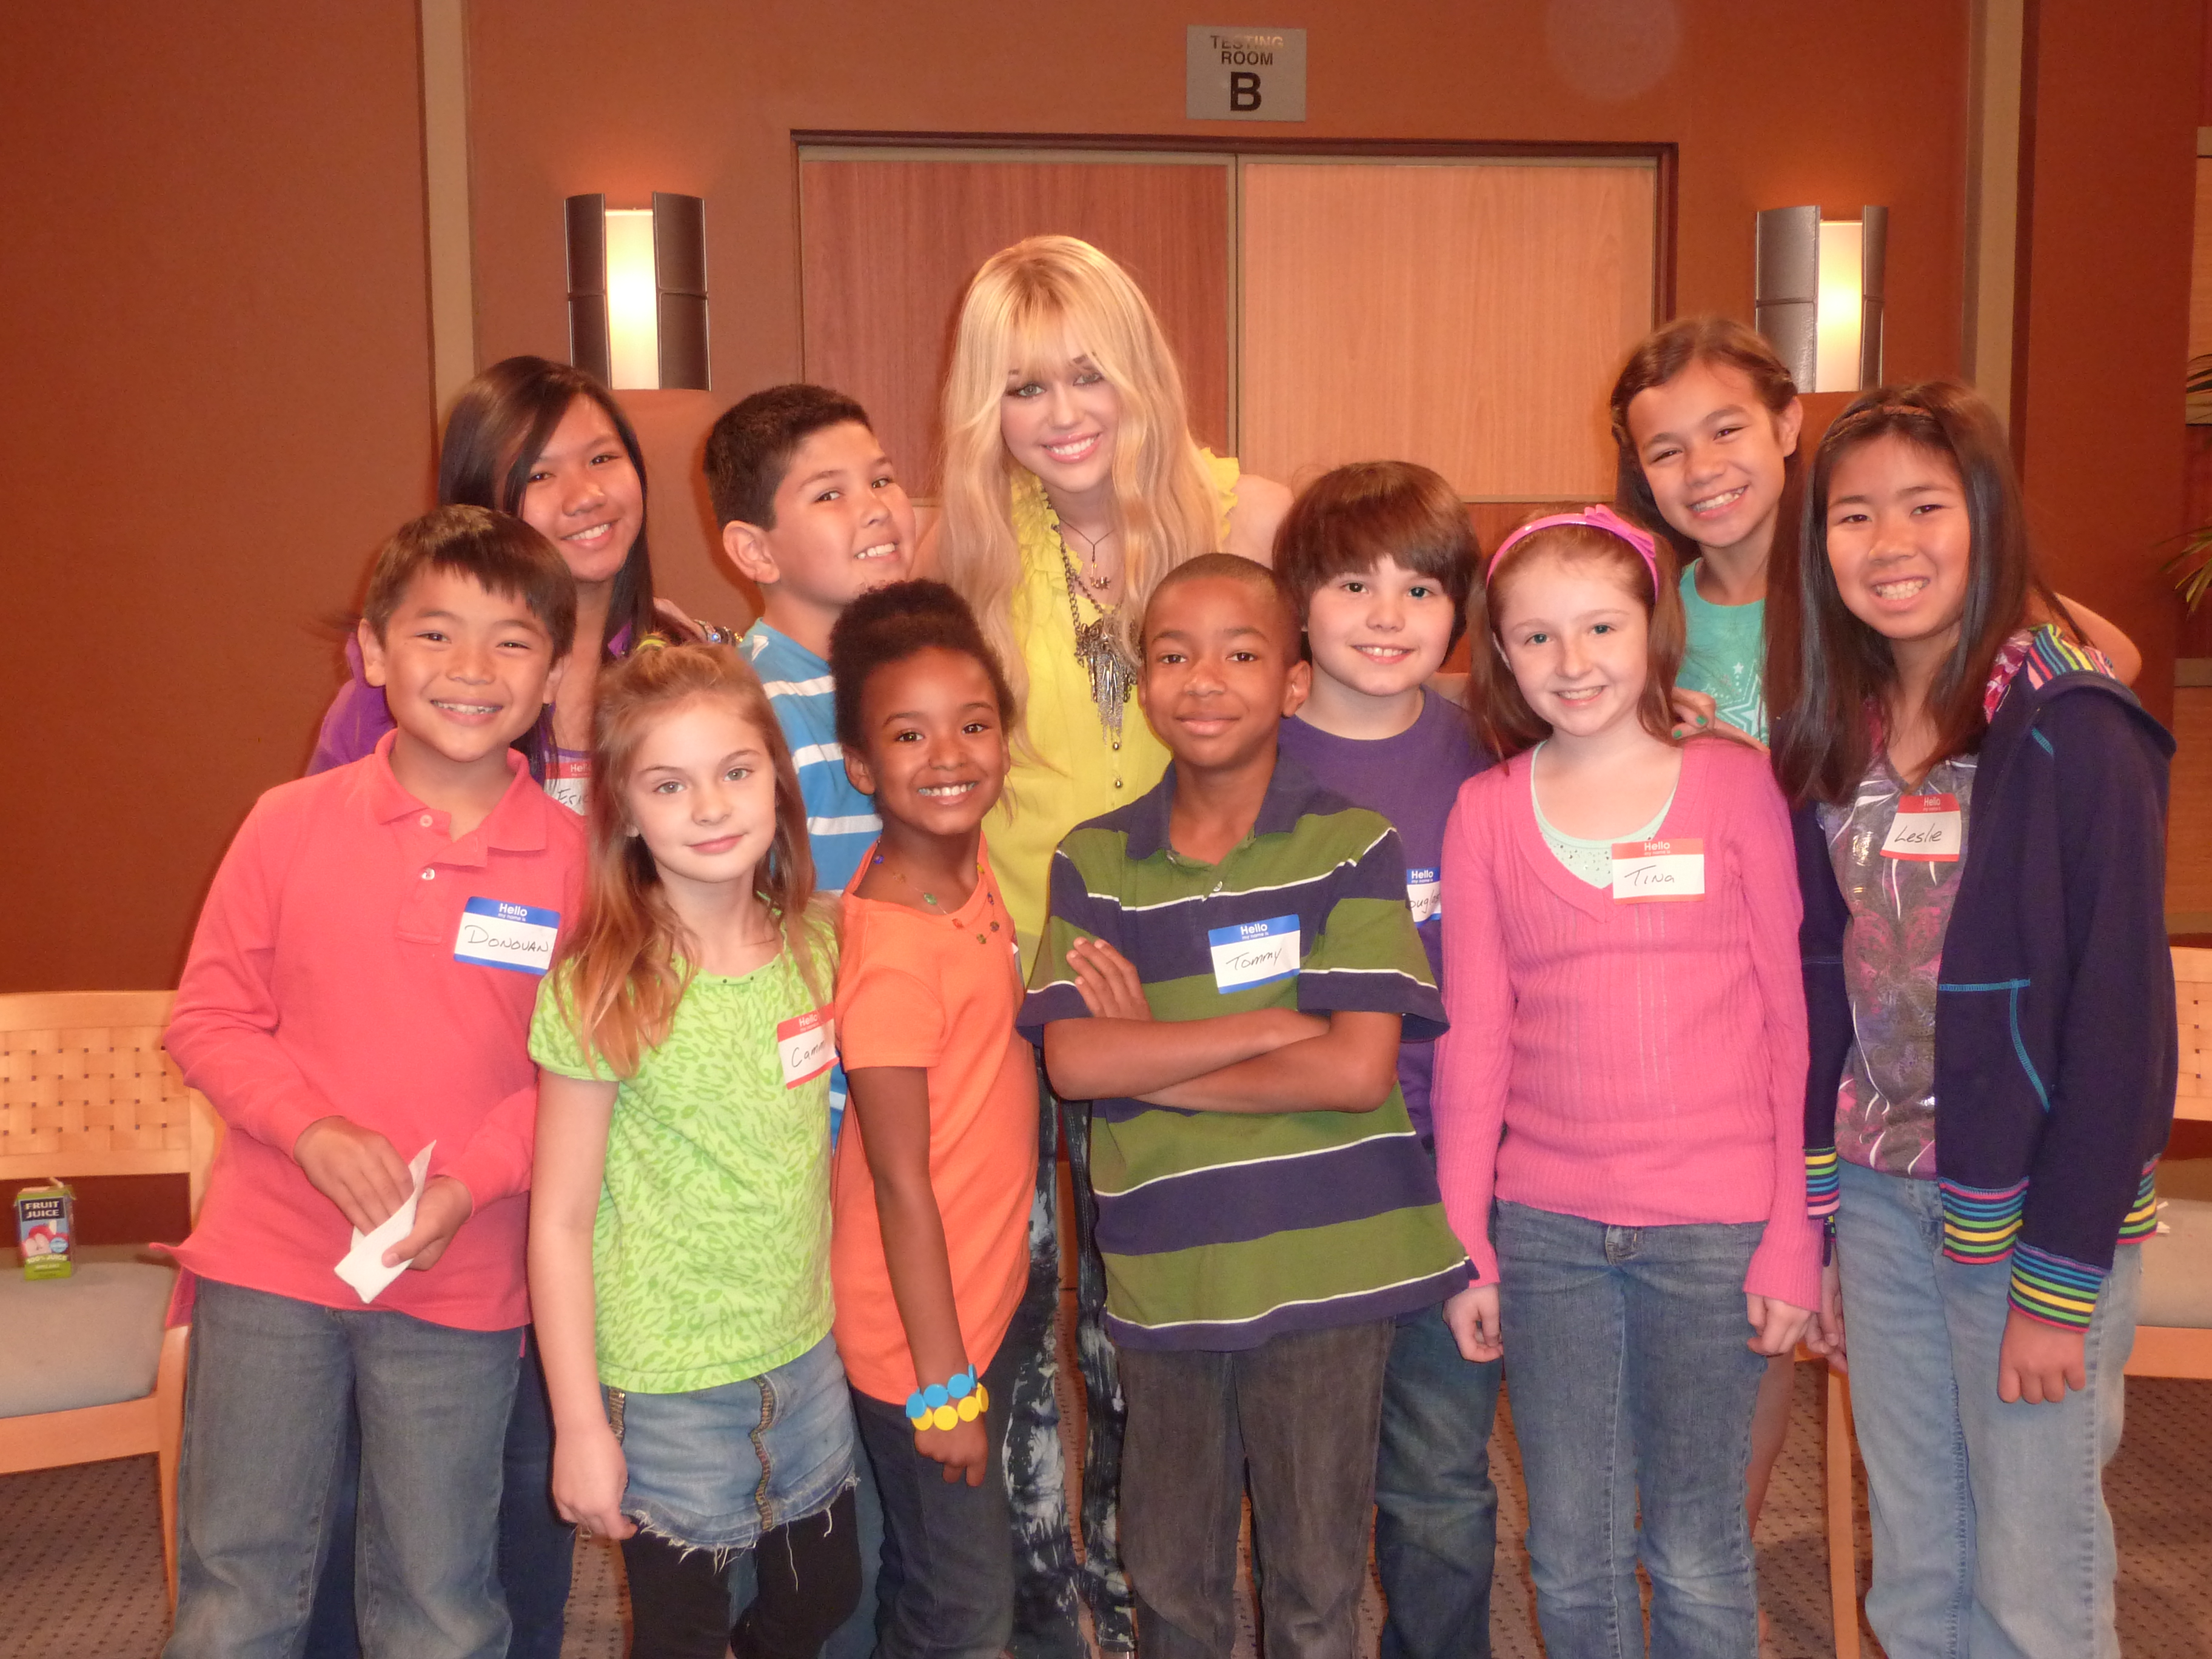 Zach Callison on the set of Hannah Montana, Episode 408 with Miley Cyrus and others.